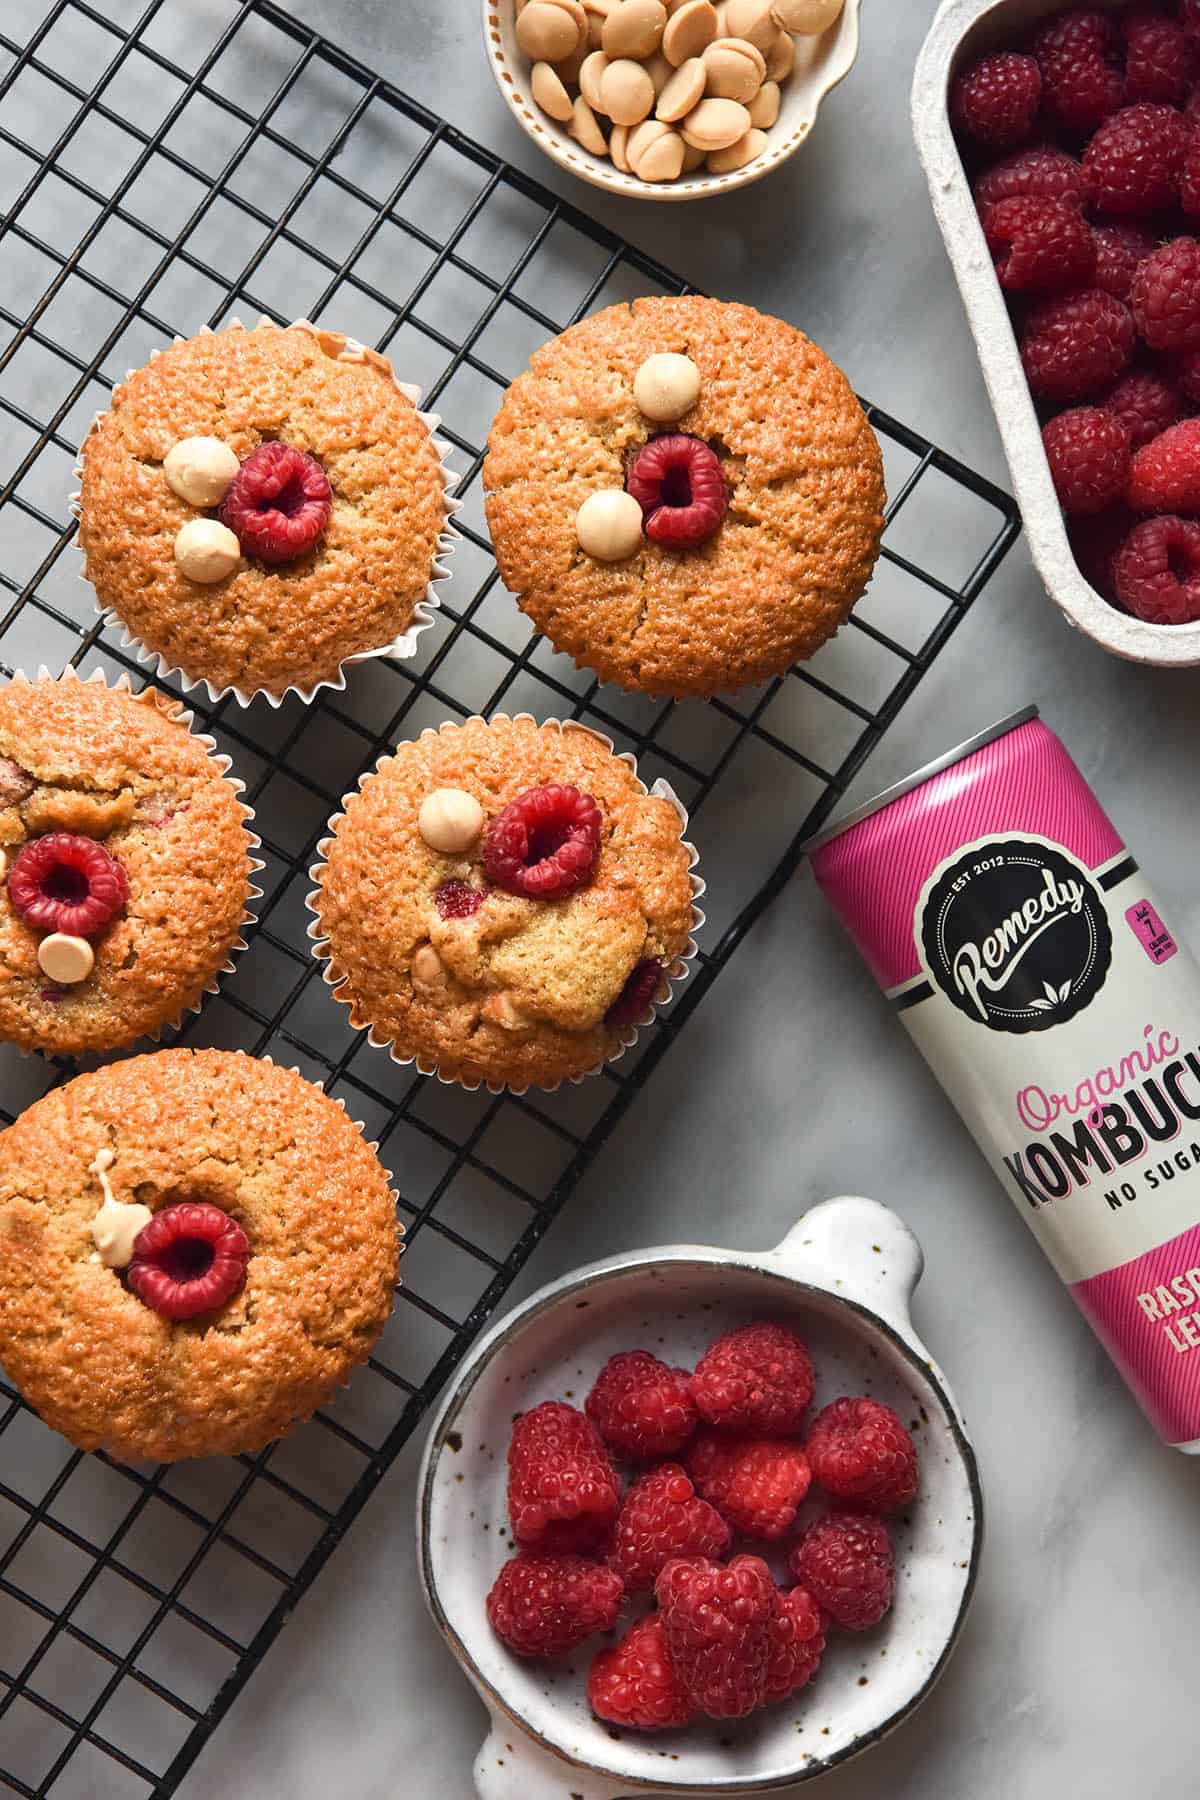 An aerial image of gluten free raspberry muffins on a baking rack atop a white marble table. The baking rack is surrounded by raspberries, kombucha and white chocolate chips, used in the muffins.